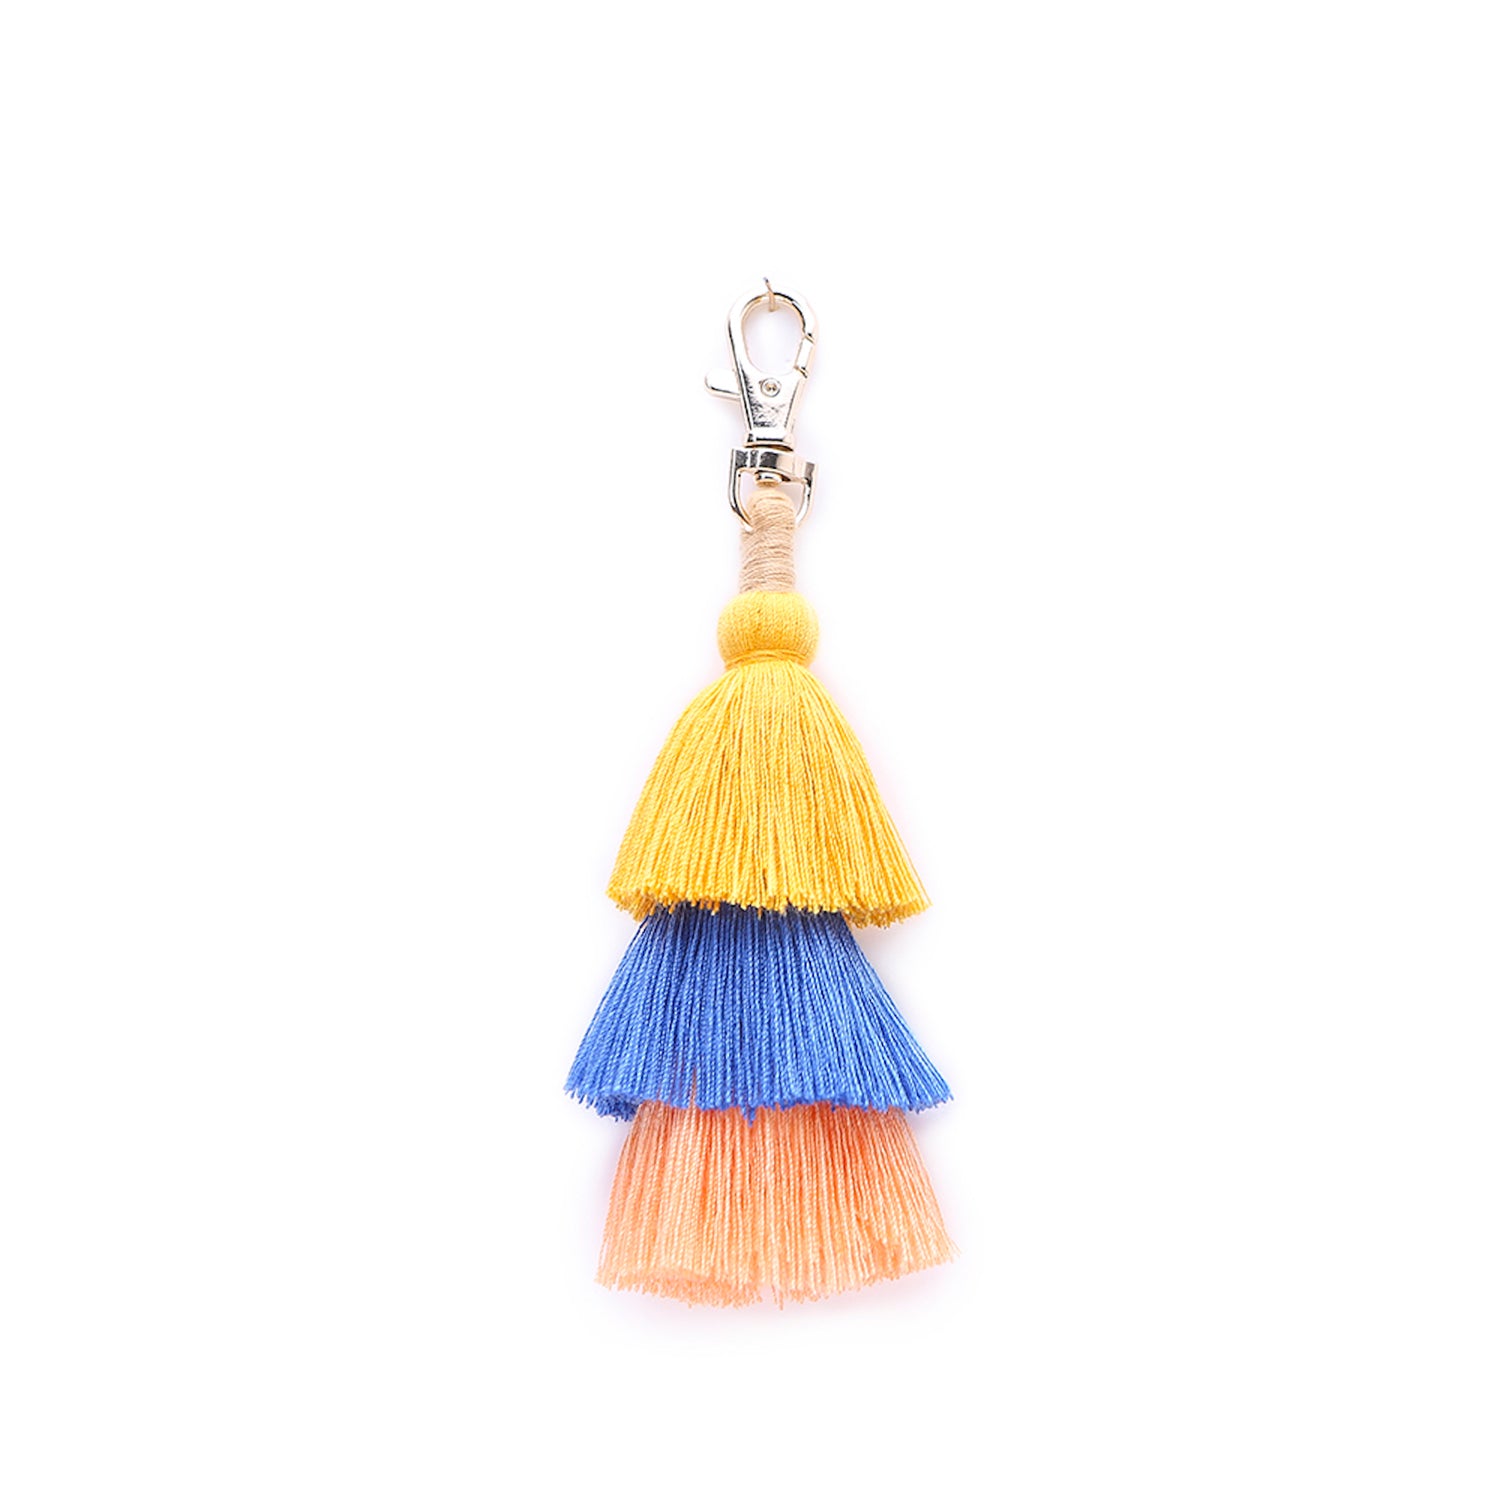 Ducksessory-Tricolour Yellow and More Cotton Single Tassel Bag Charm